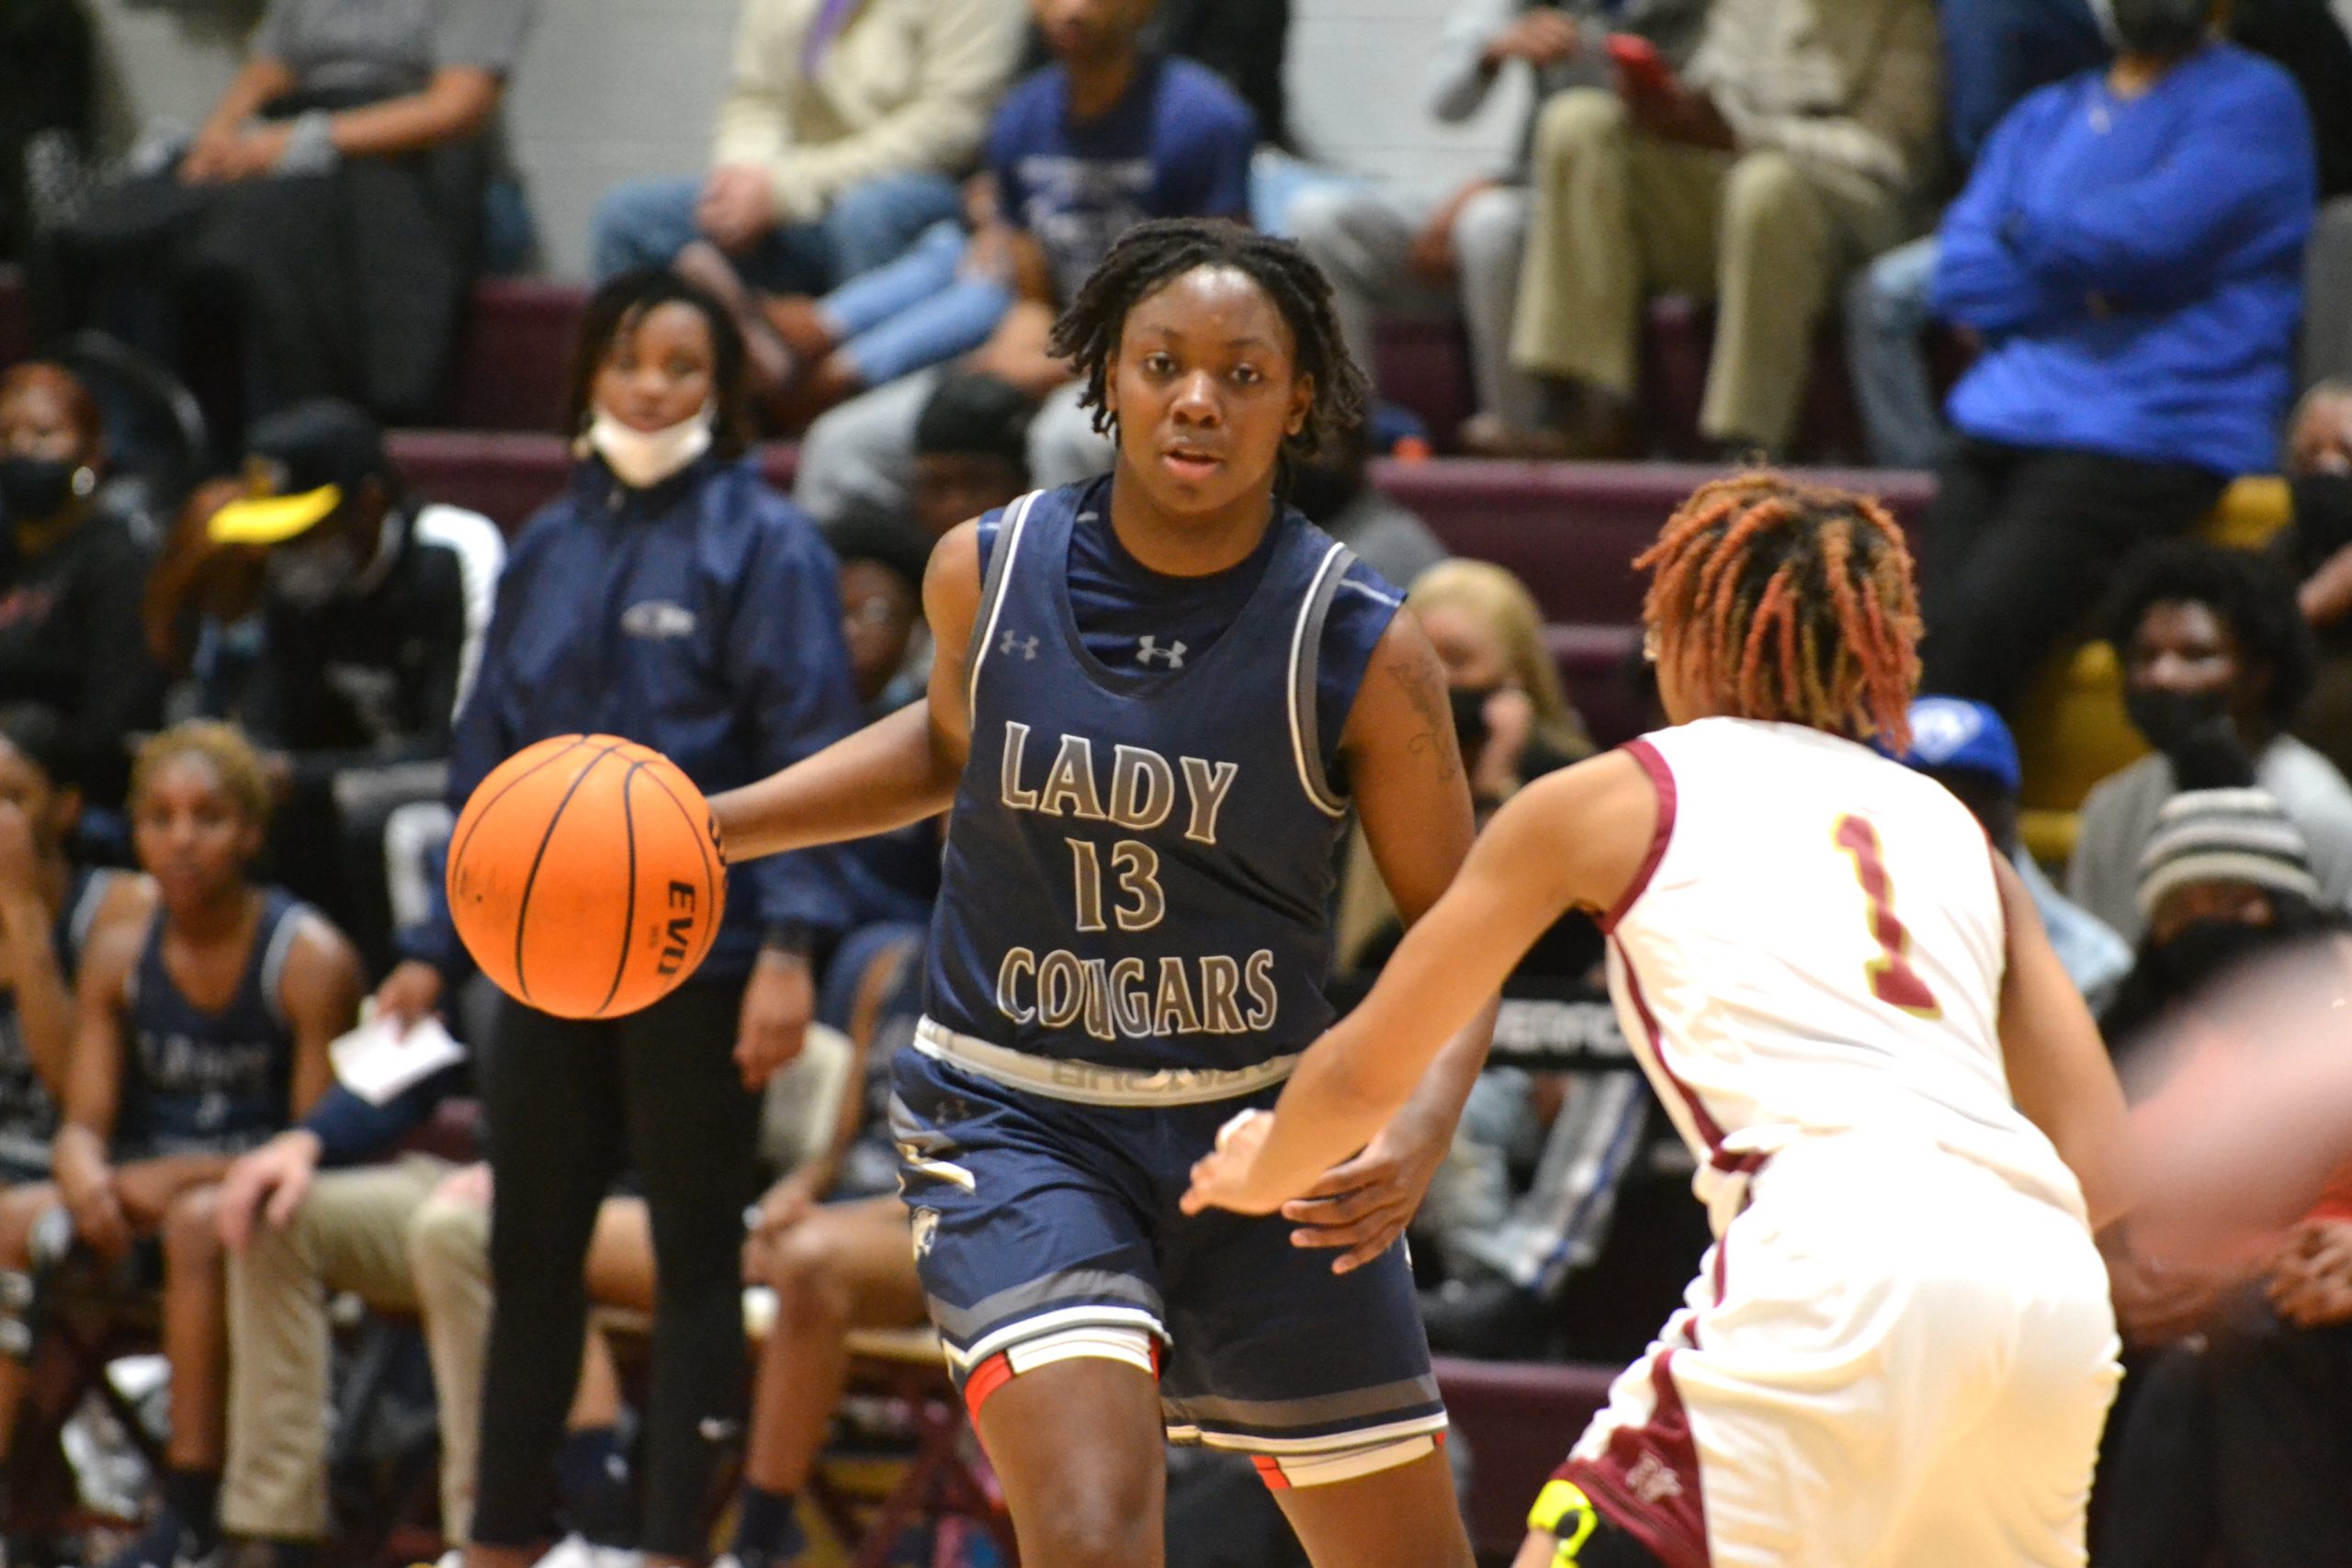 GIRLS HOOPS: Clay-Chalkville handles Pinson in area play